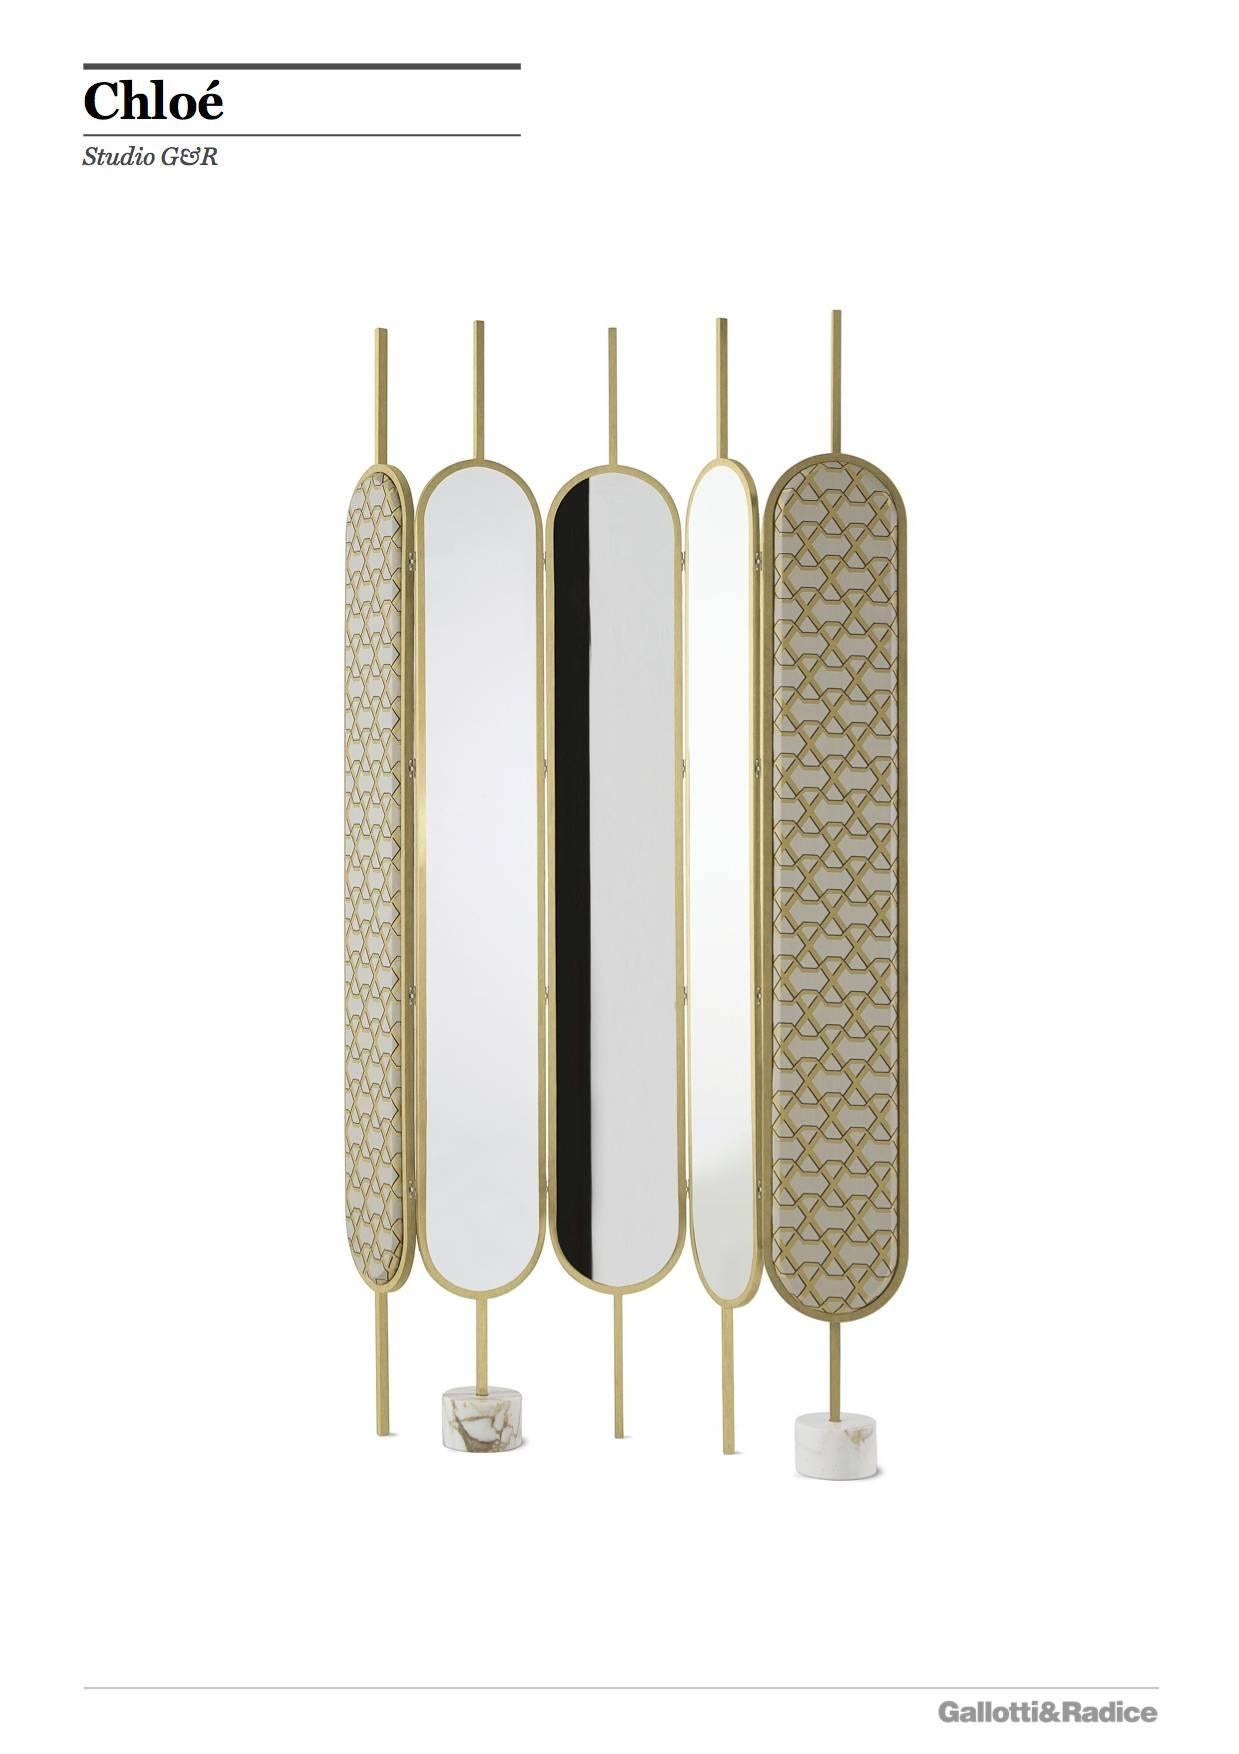 Modern Gallotti & Radice Chloé Screen/Mirror in Brass Finish with Fabric Panels For Sale